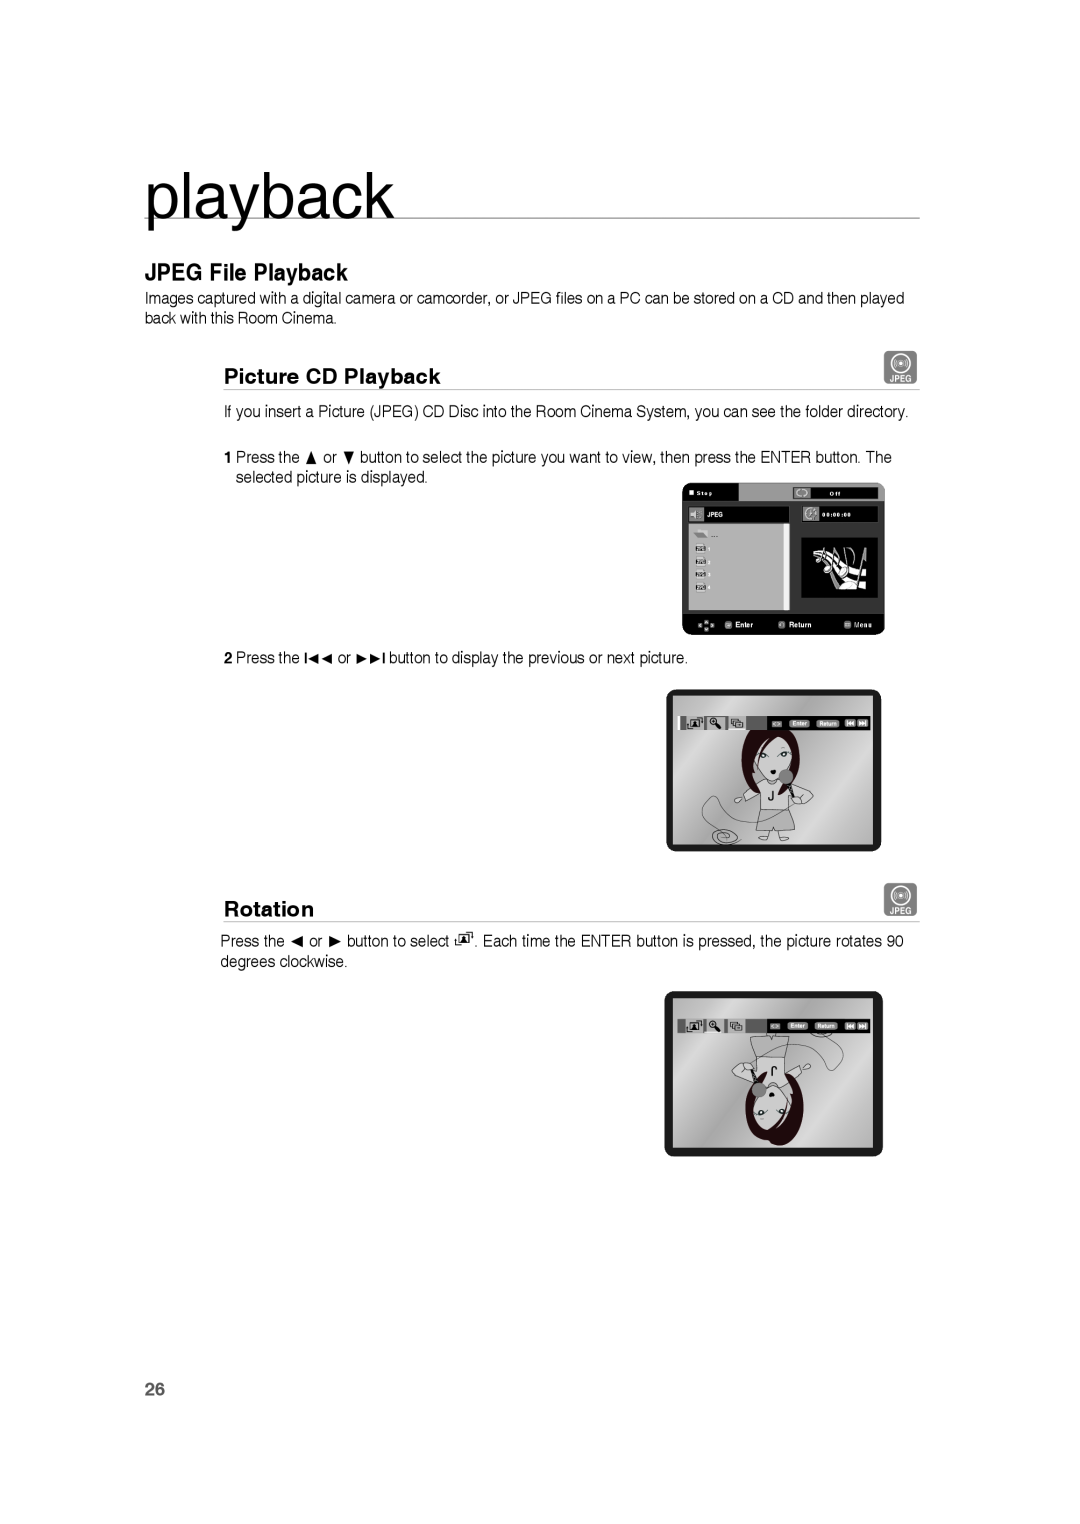 Samsung HE10T user manual JPEG File Playback, Picture CD Playback, Rotation, playback 